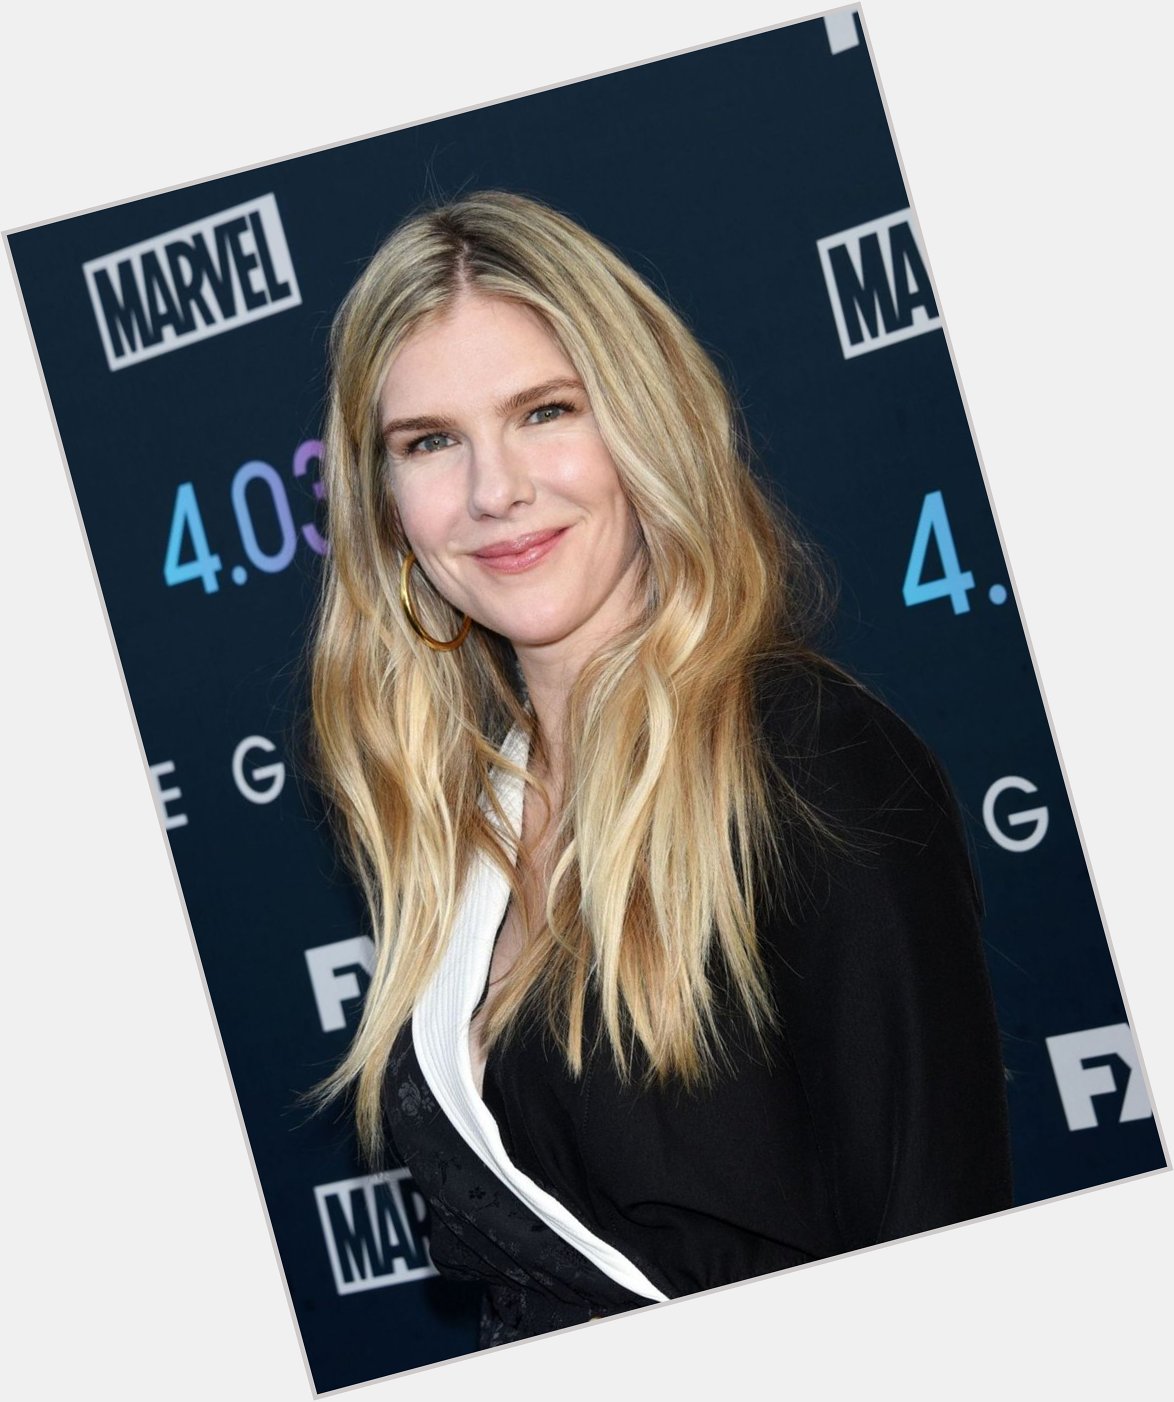 A happy belated birthday to this legend, lily rabe! 